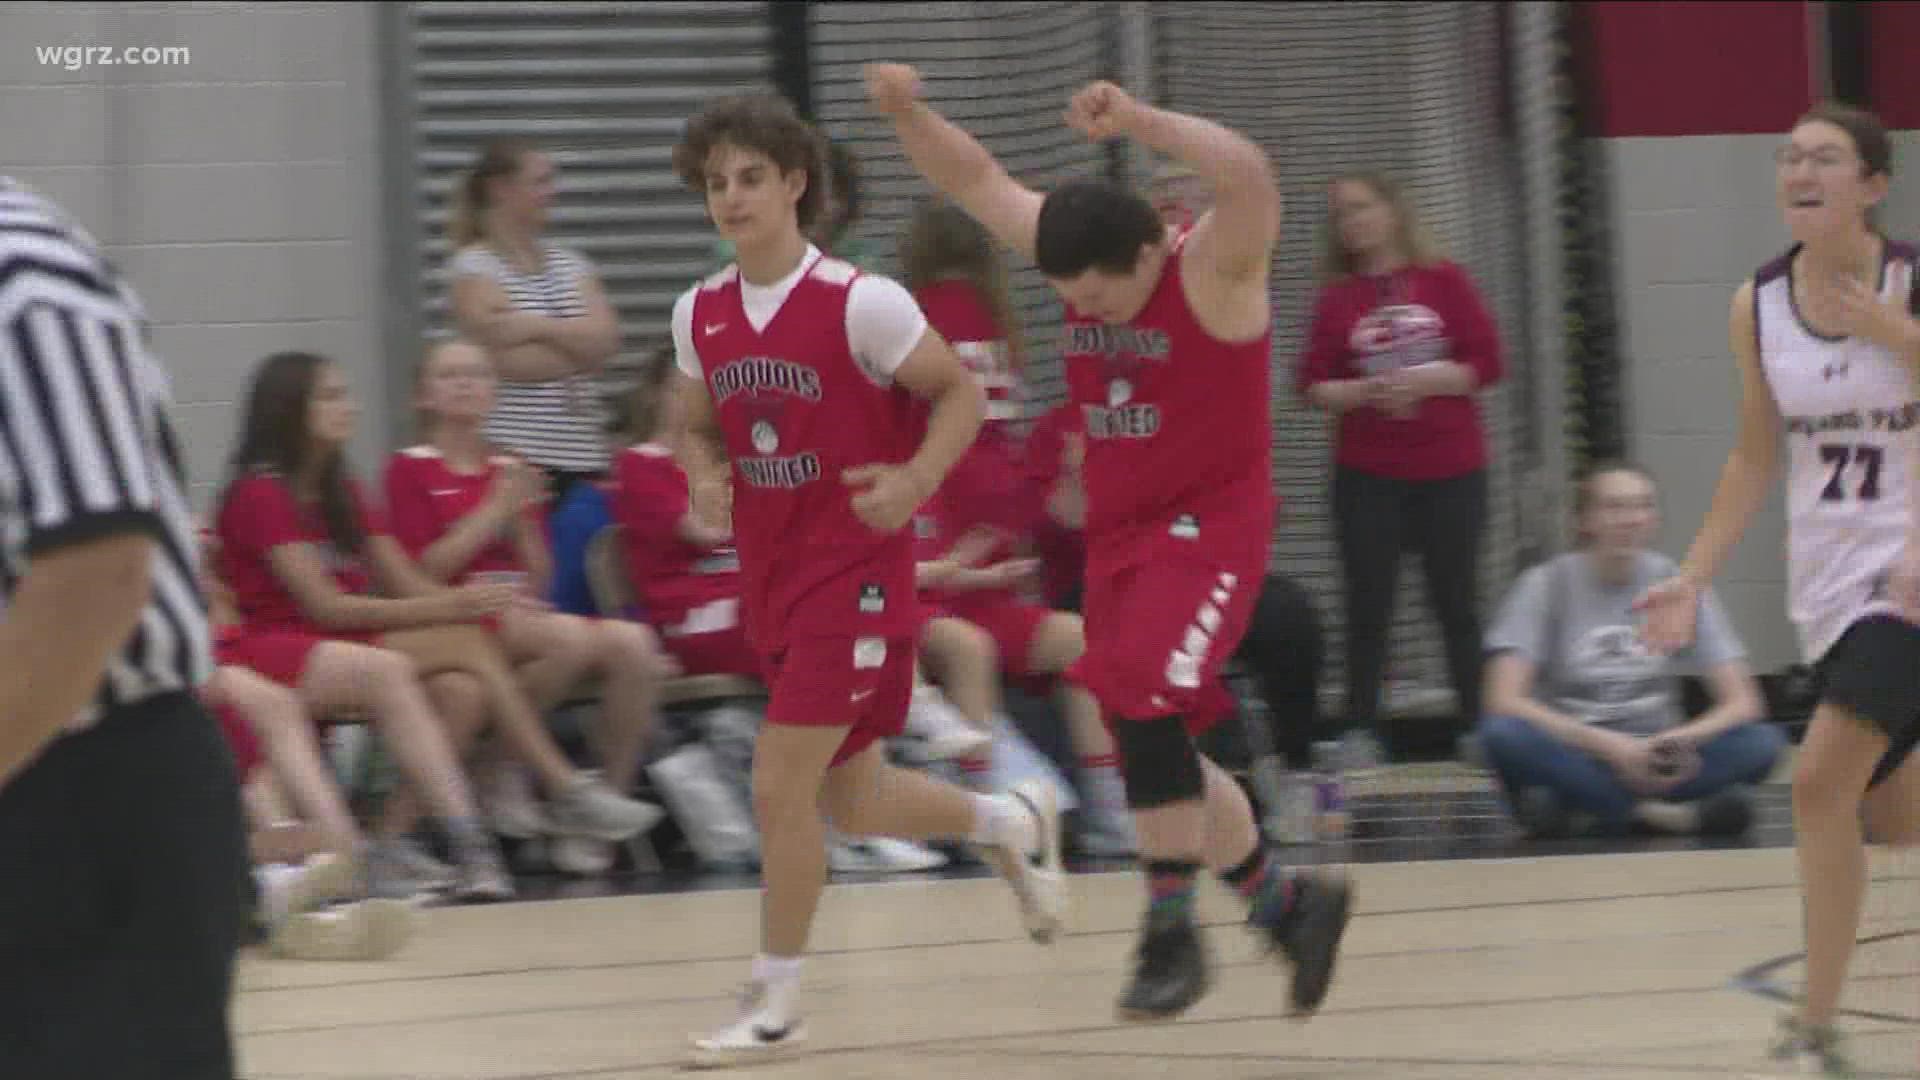 Students from across New York came together to Lancaster High School for united basketball games hosted by the Special Olympics.